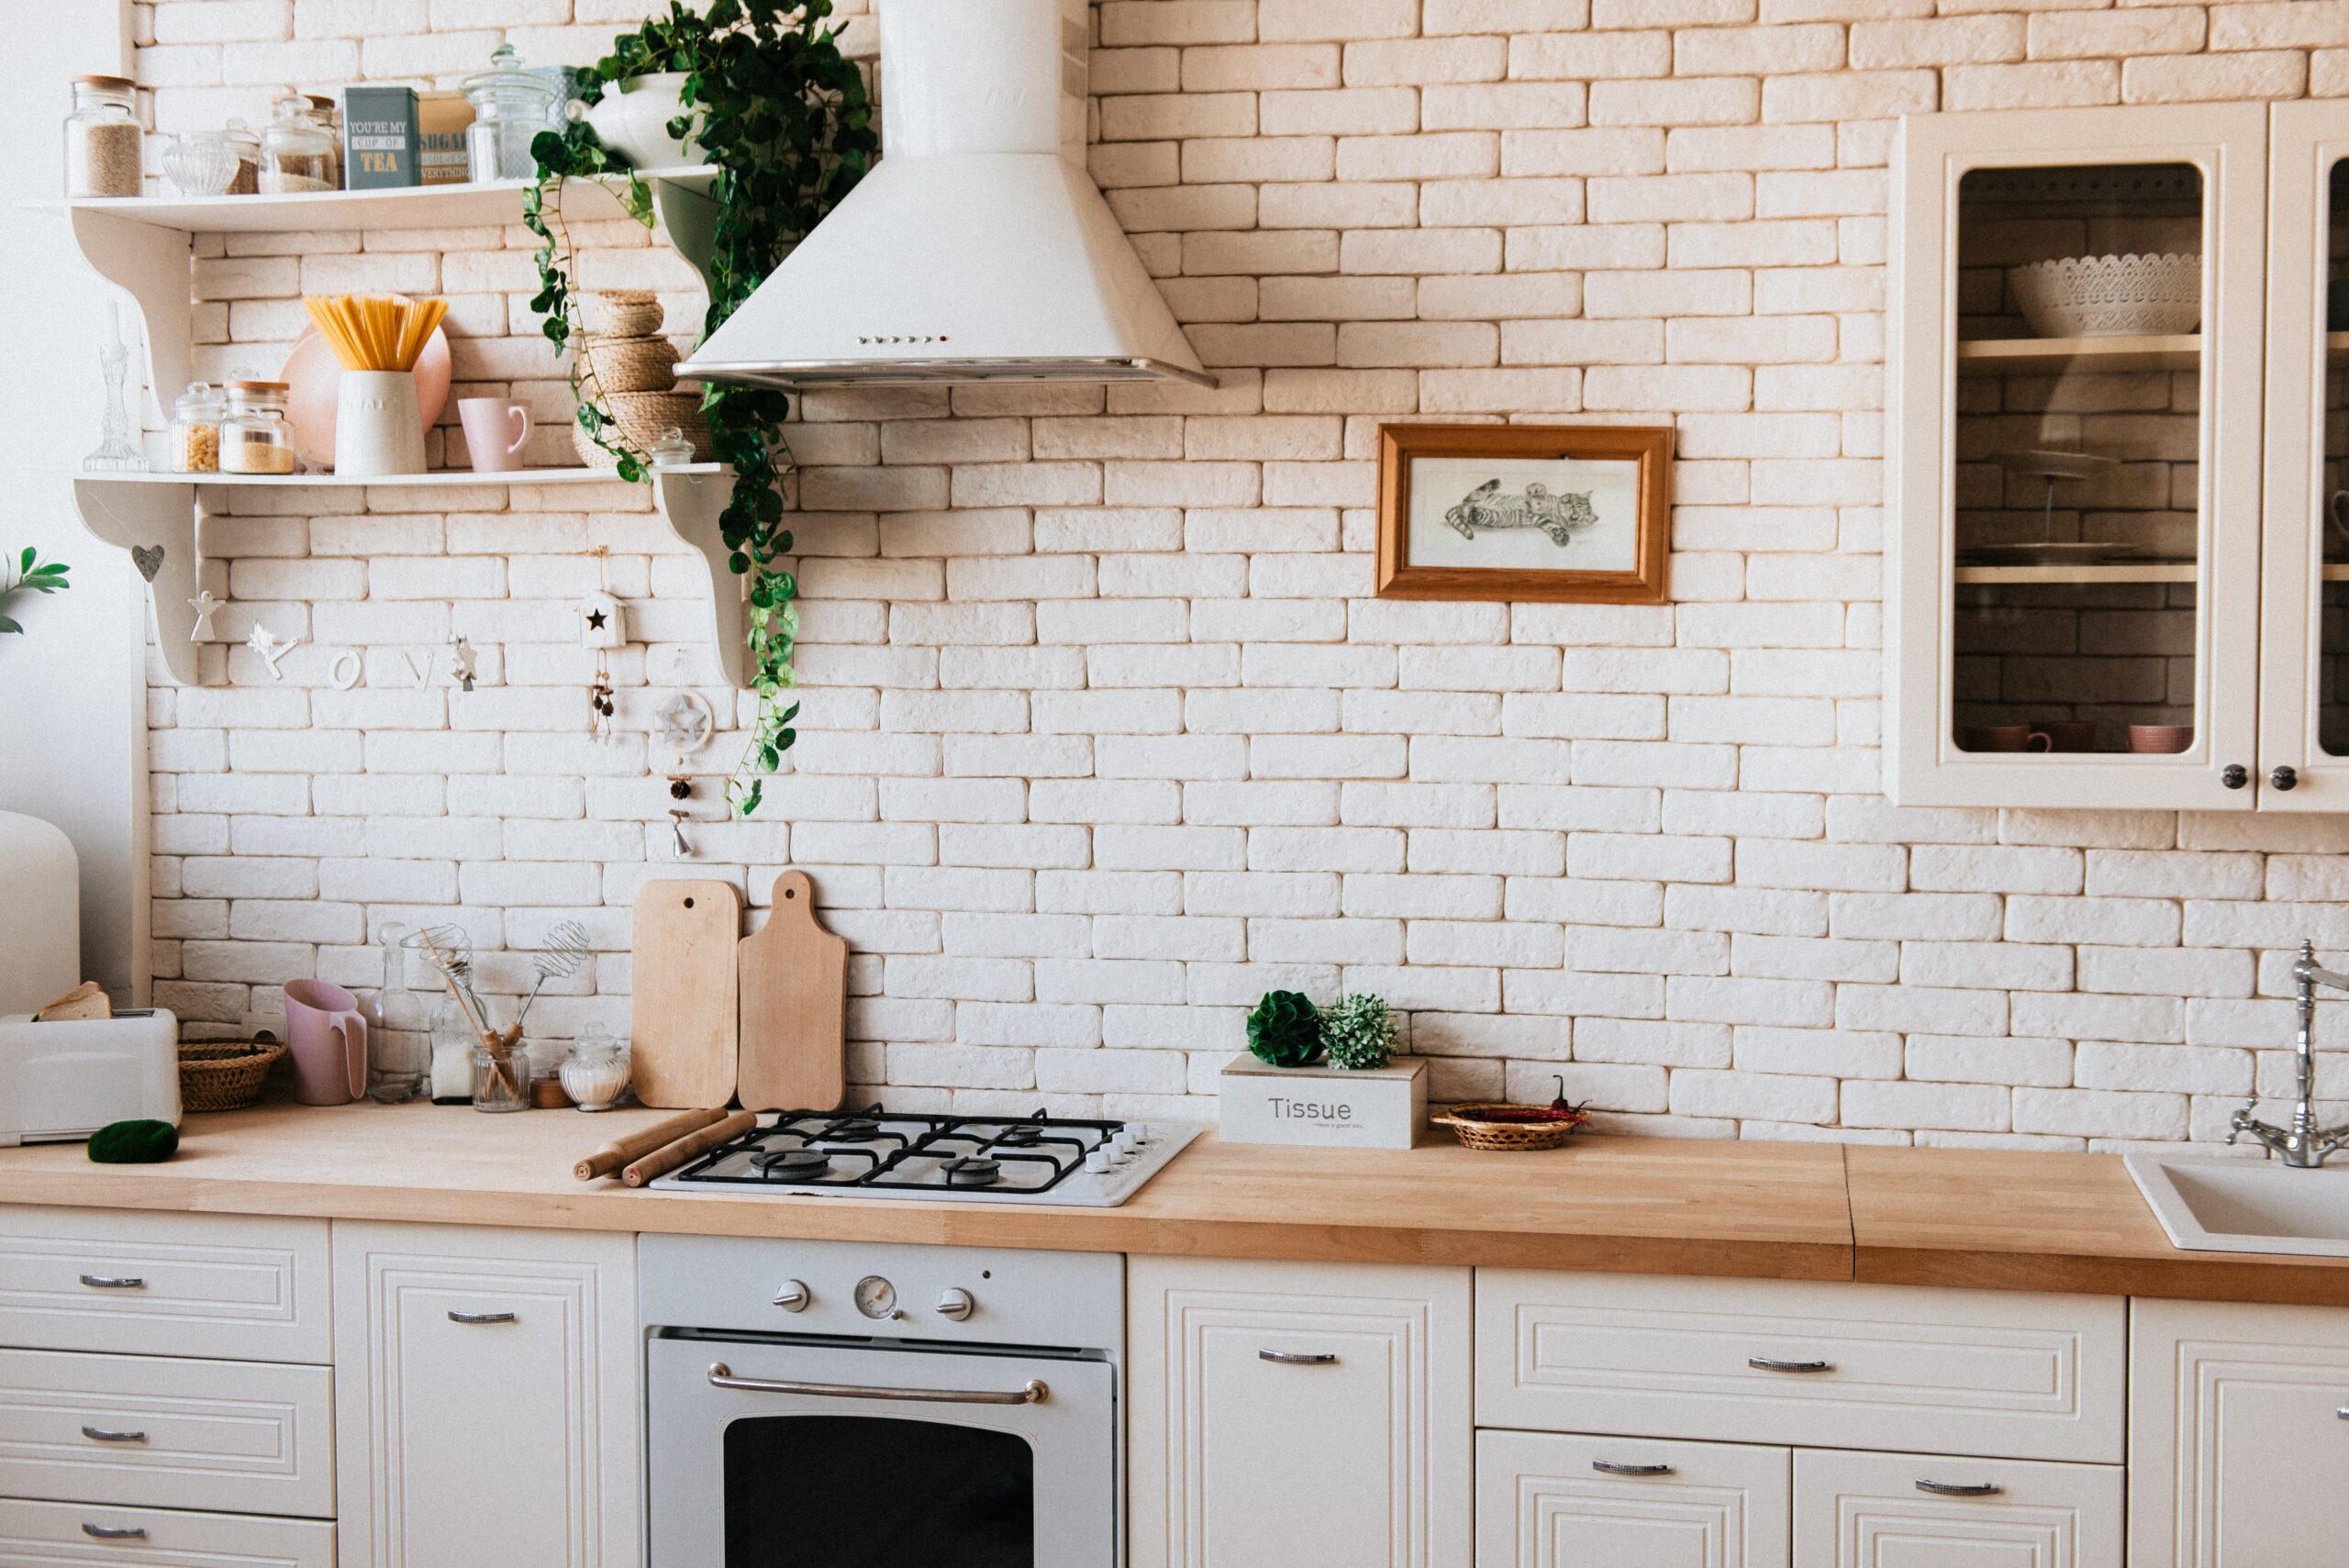 opening a kitchen design business